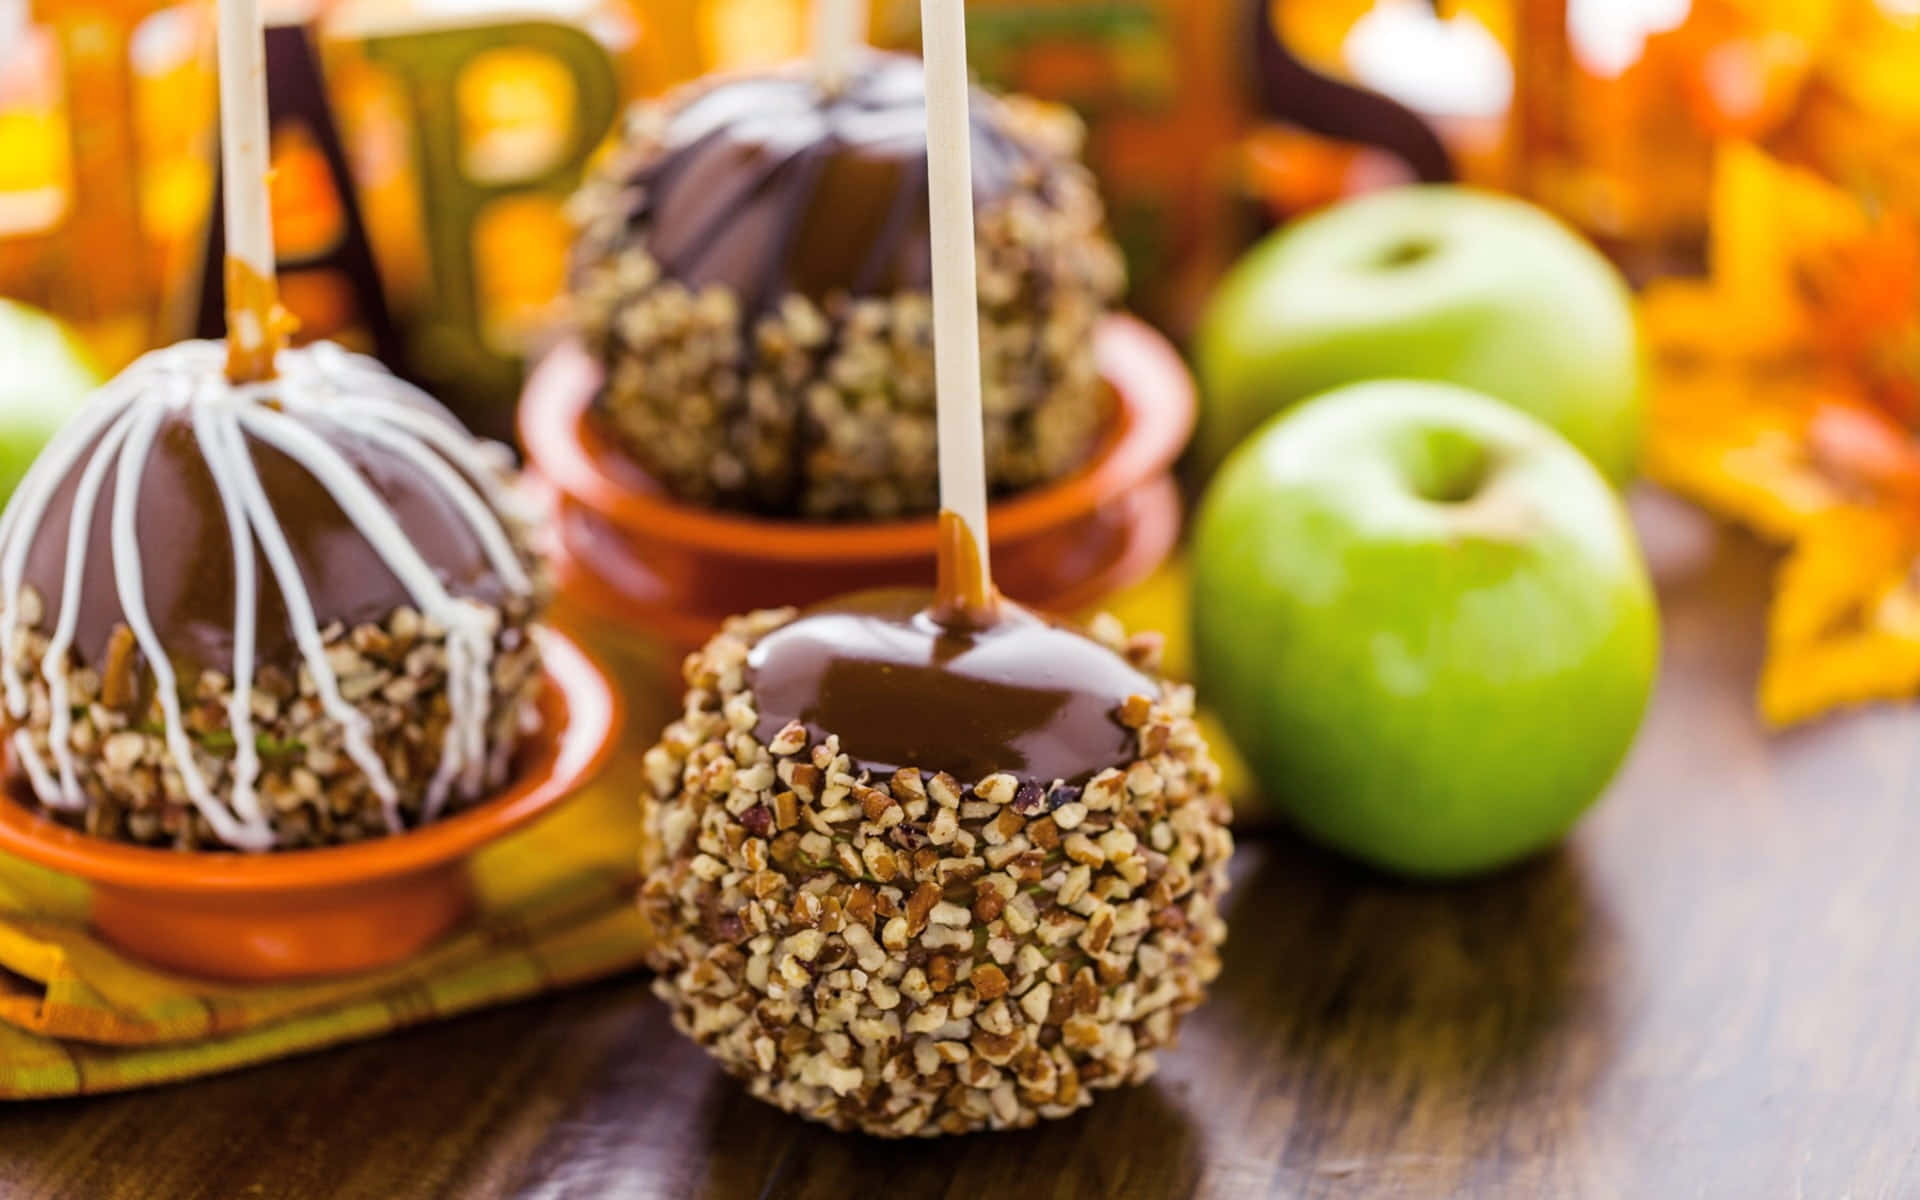 Mouthwatering Caramel Apples on Rustic Wood Table Wallpaper